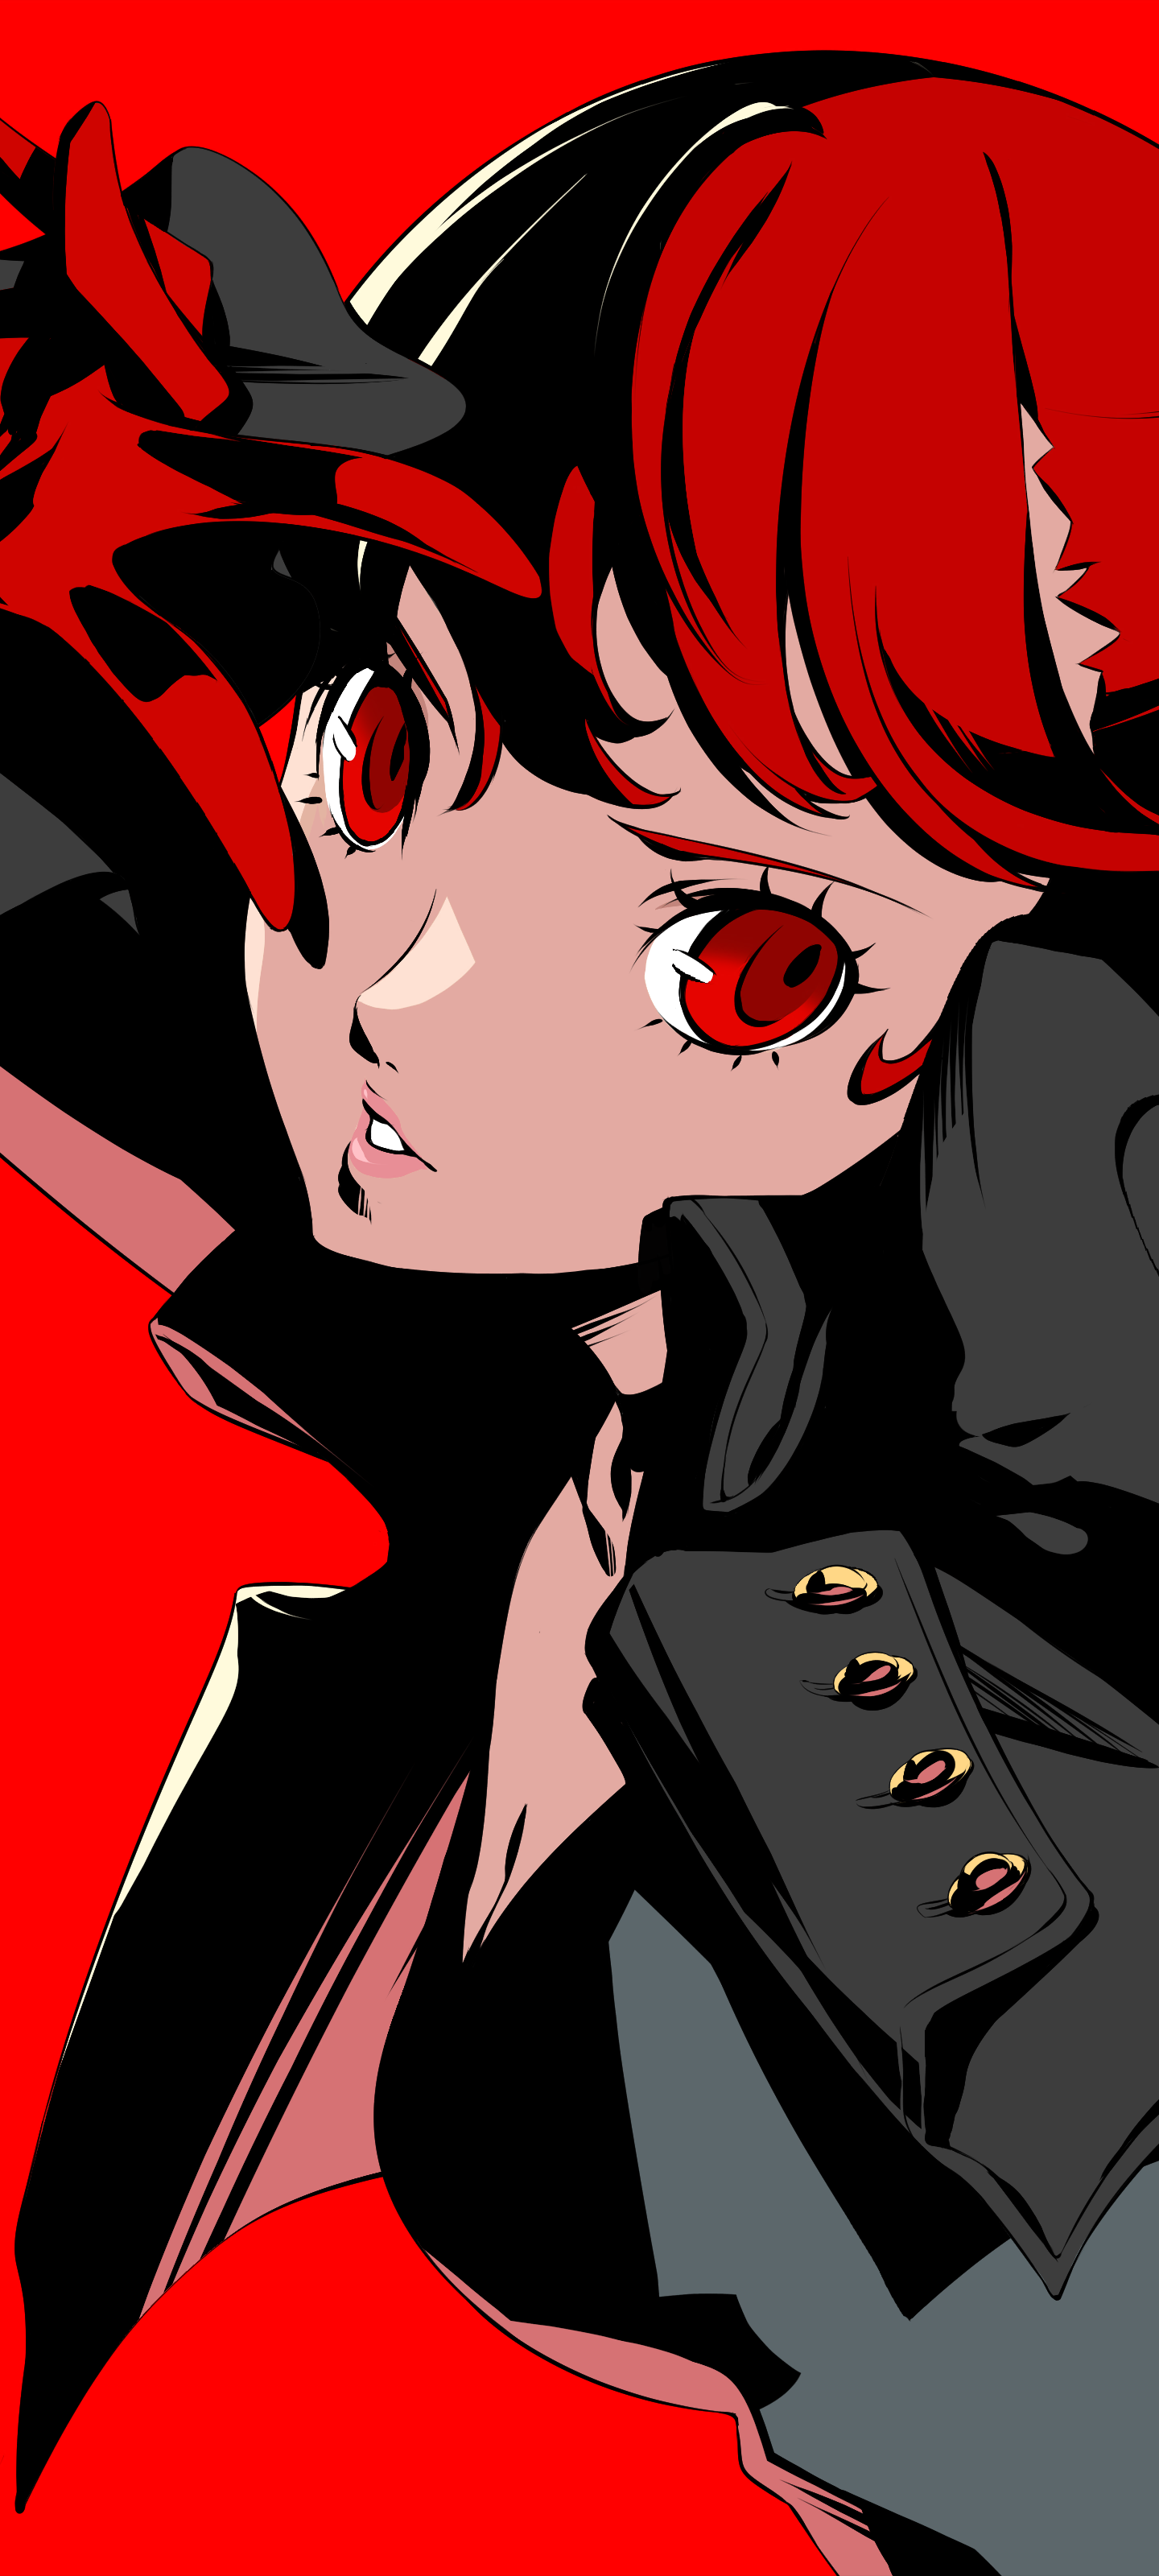 Persona® 5 Mobile Wallpapers